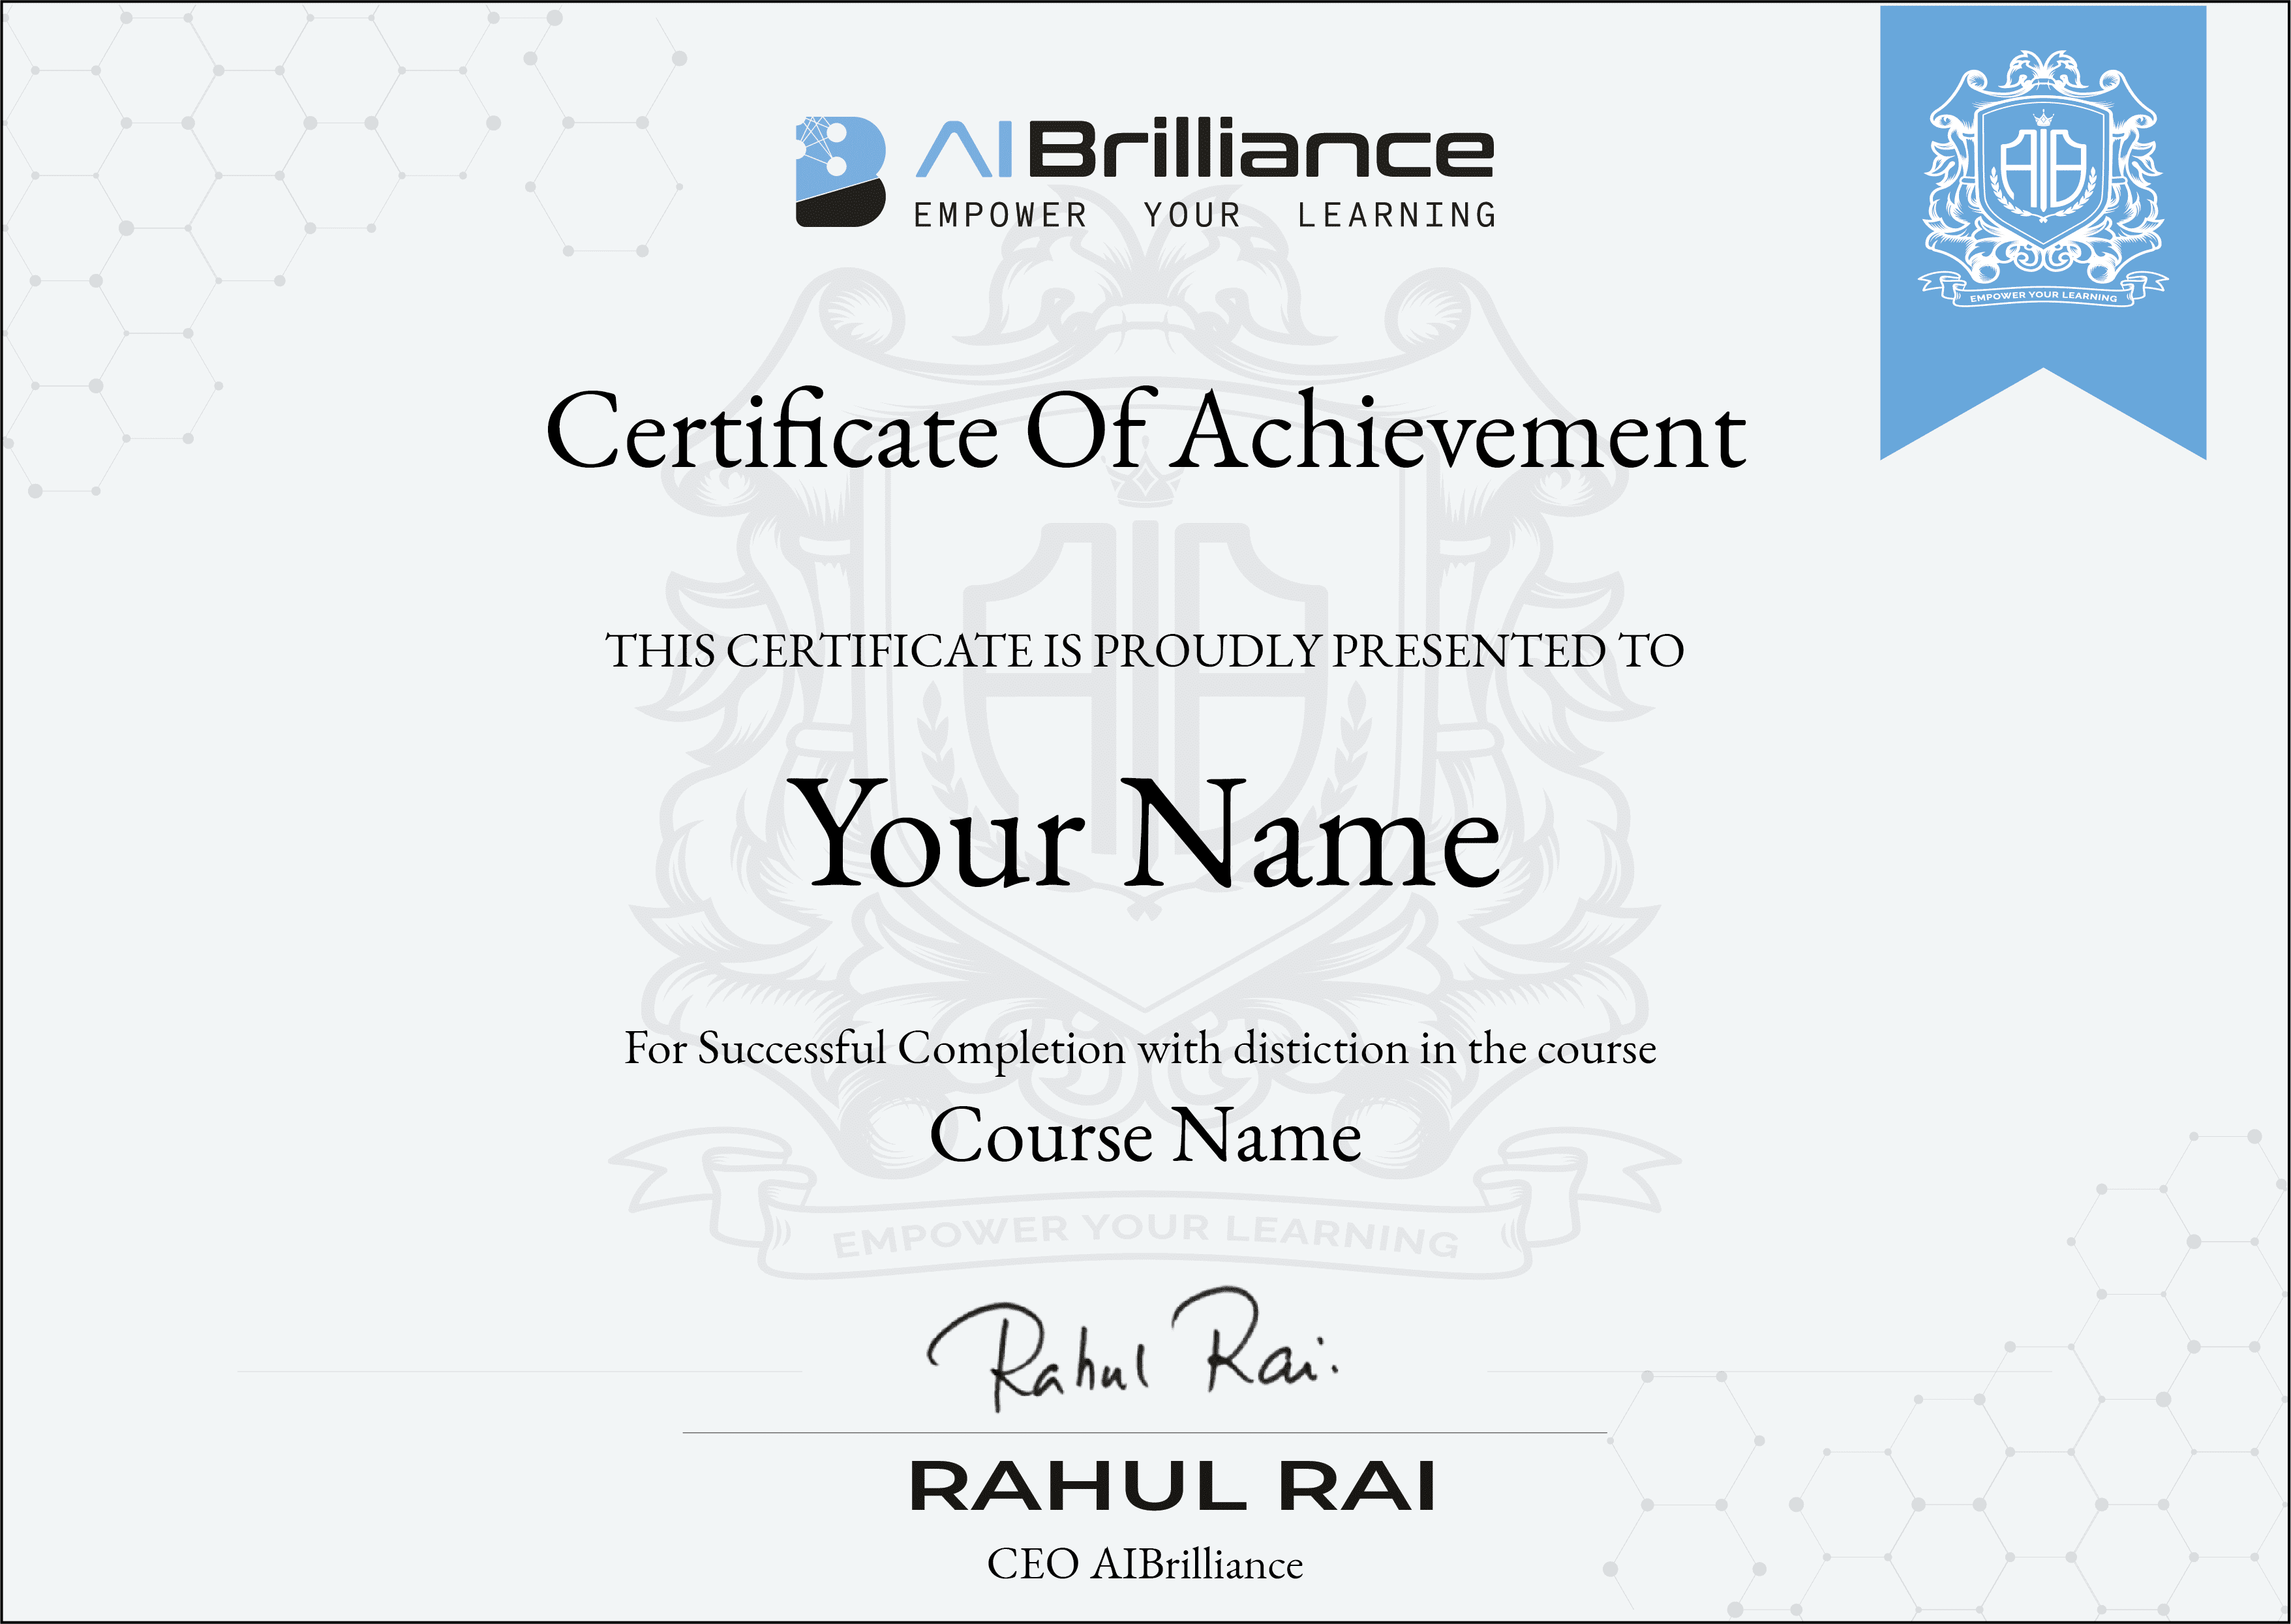 AIB Certificate  data science and machine learning